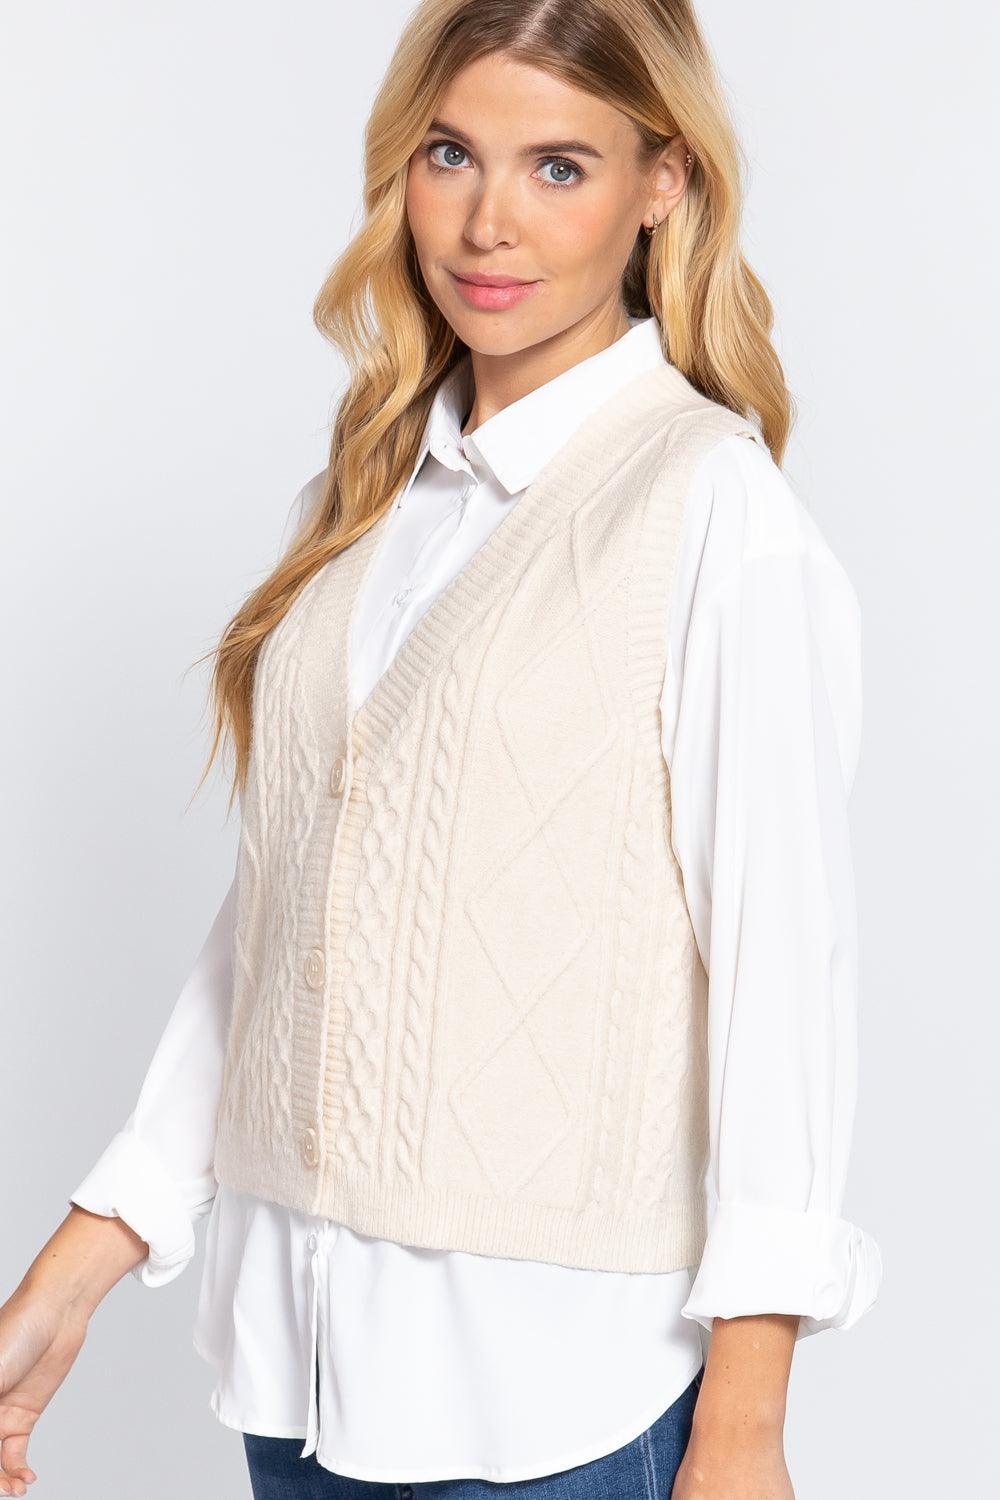 V-neck Cable Sweater Vest Cardigan Naughty Smile Fashion